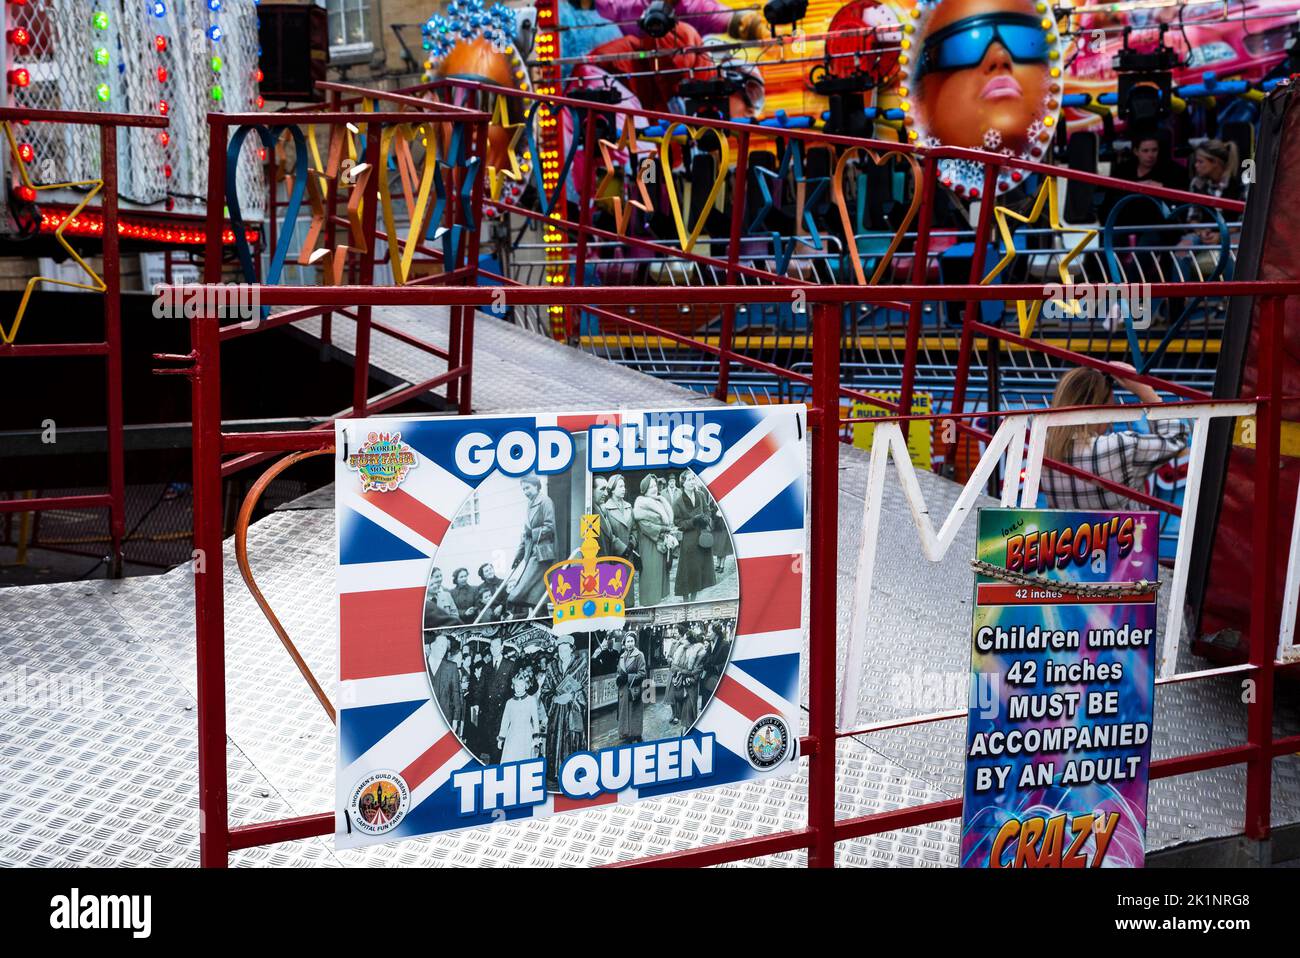 Annual Chipping Norton Mop Fair displays God Save the Queen signs. Stock Photo